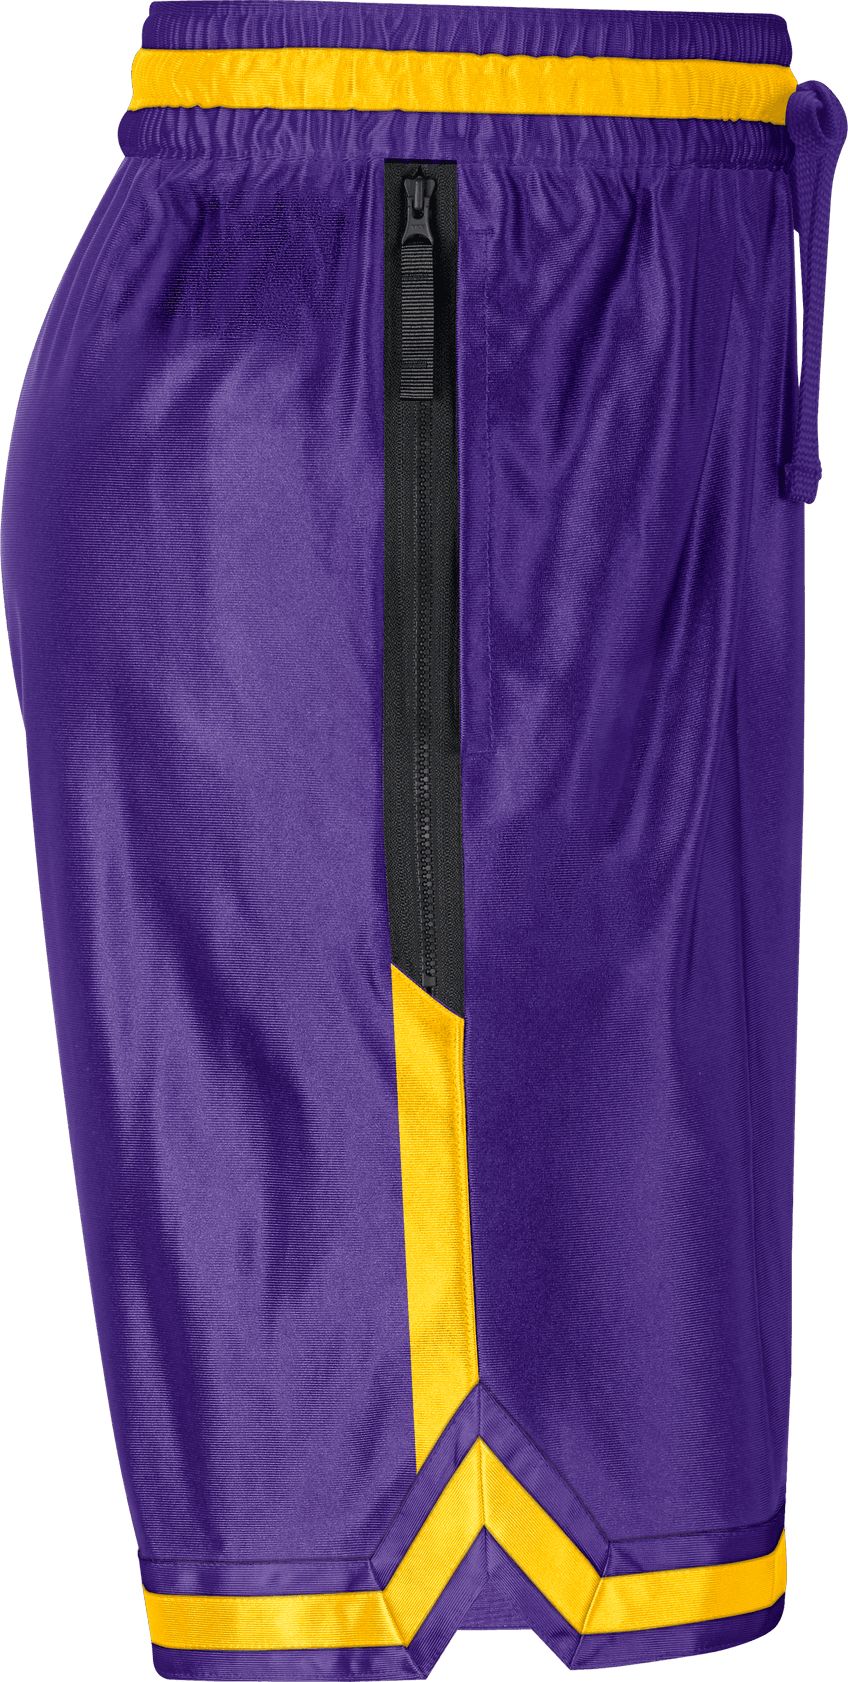 NIKE, Los Angeles Lakers Courtside Men's